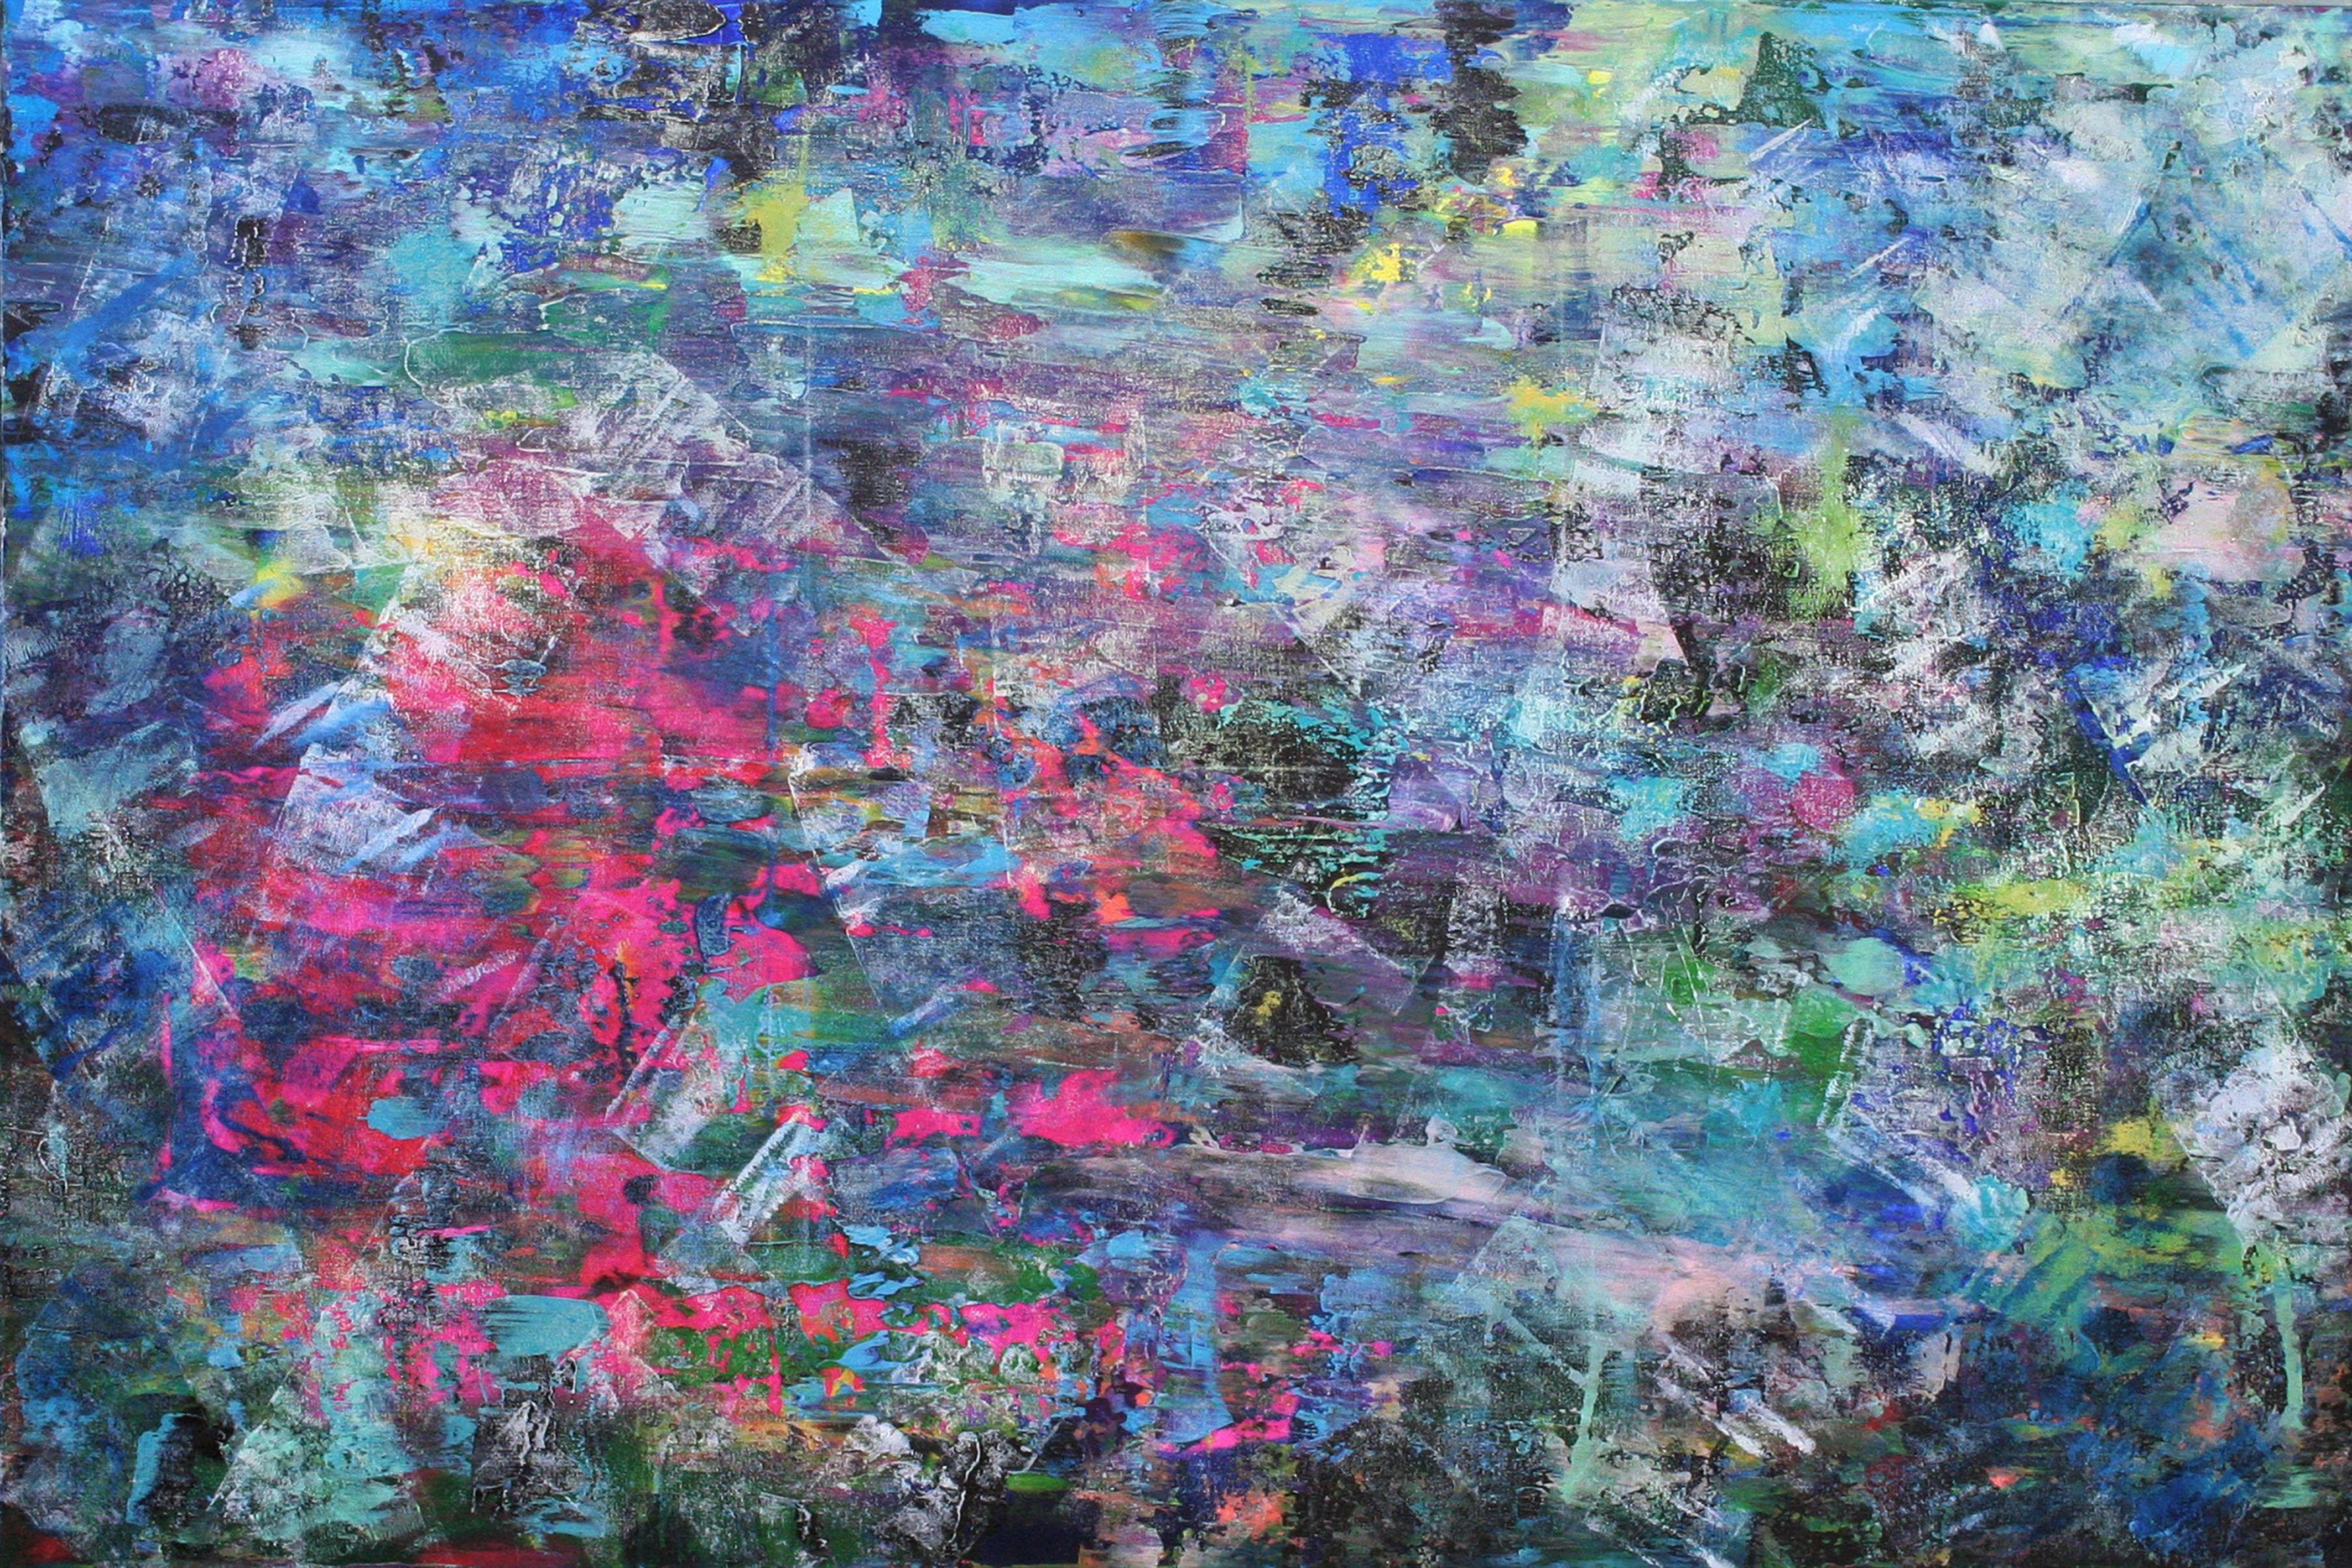 XXXL Spectral Distortion 150 x 100cm Abstract, Painting, Acrylic on Canvas